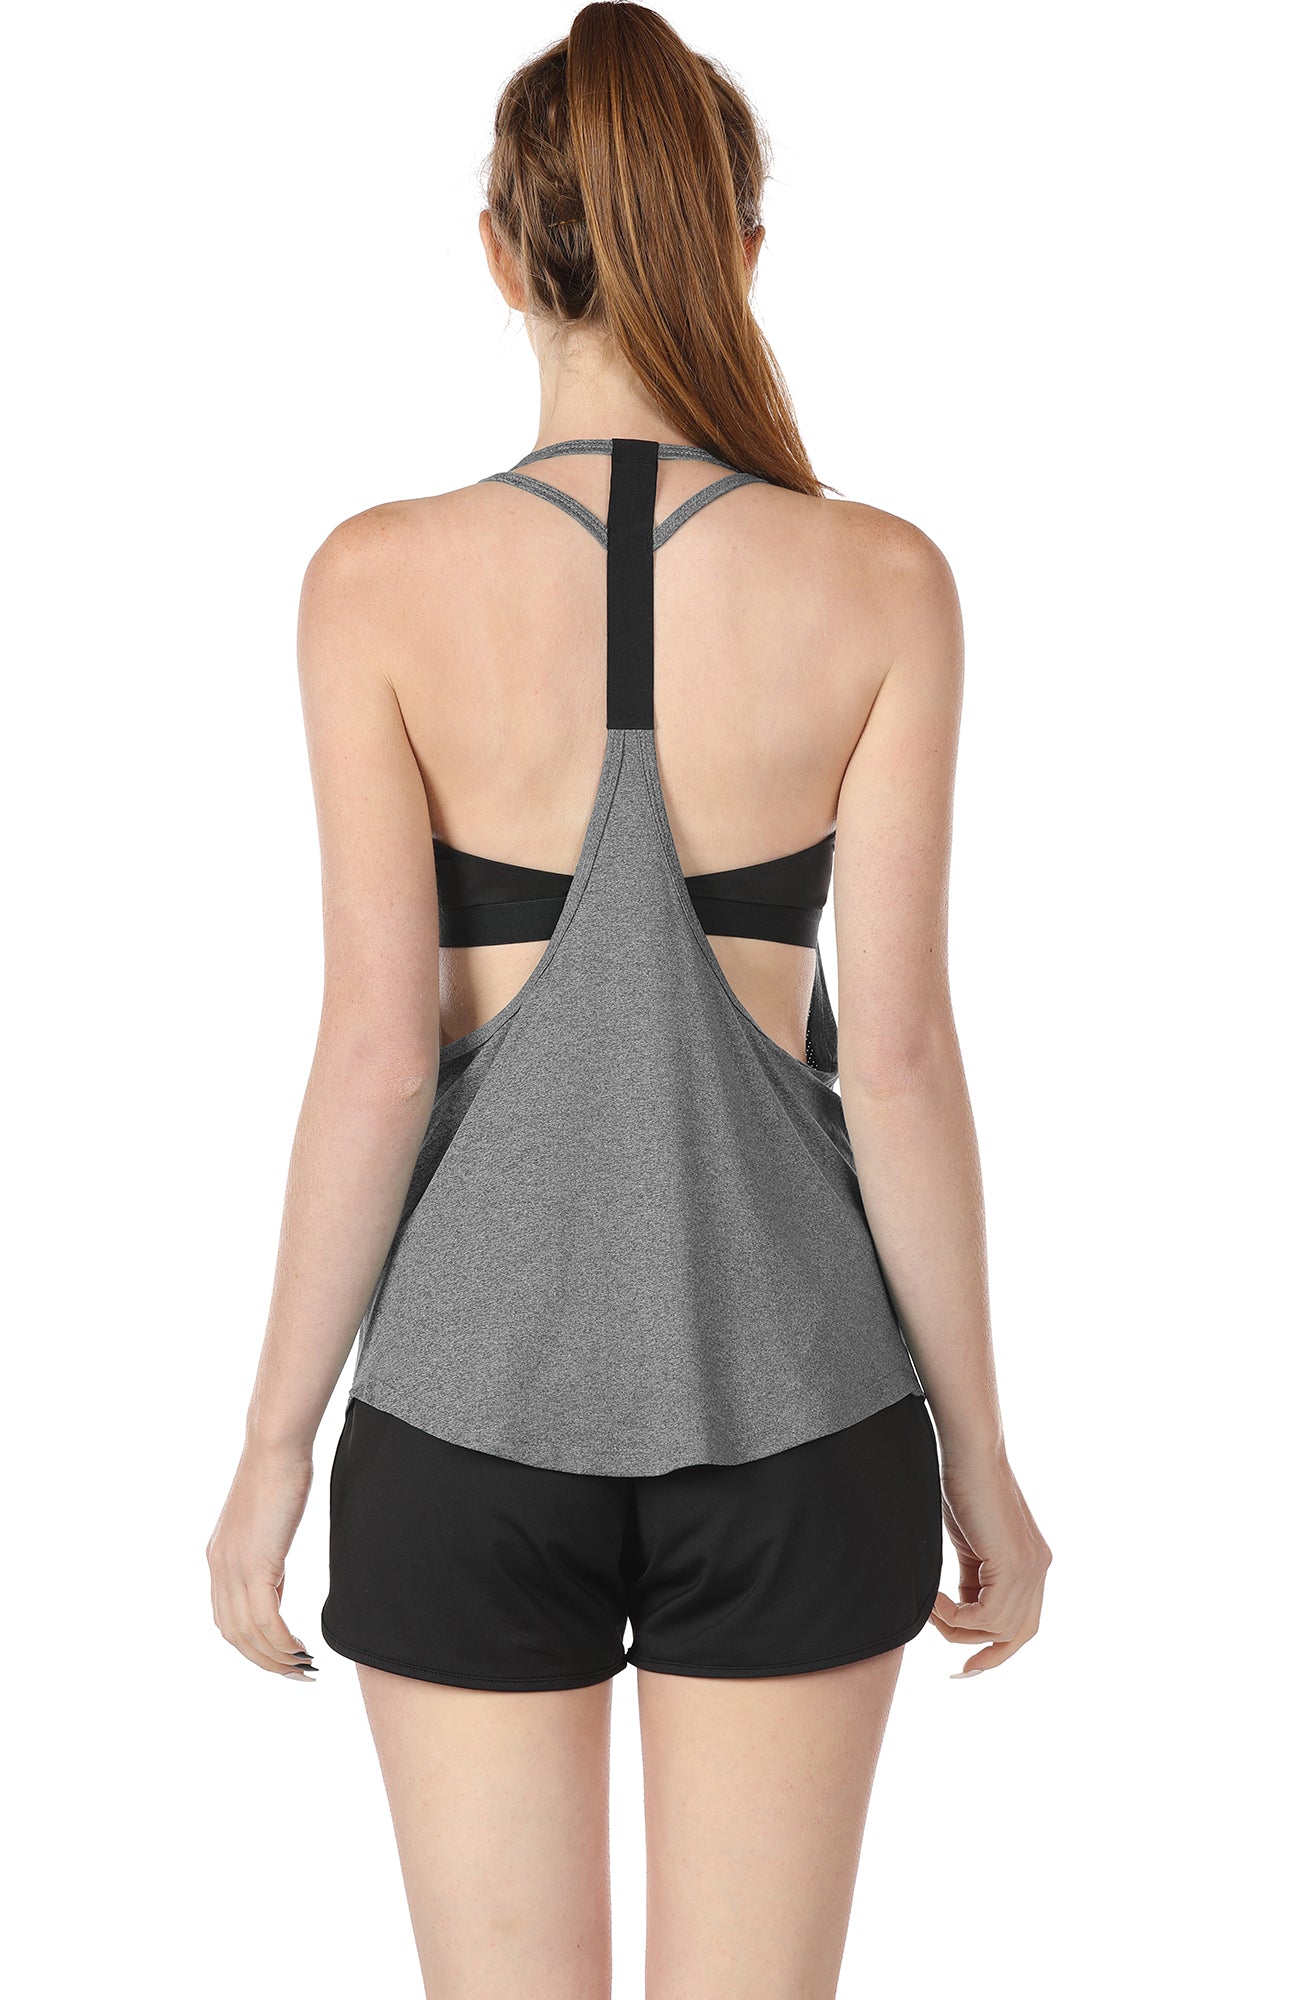 icyzone Women's Built in Bra Workout Tank Tops - Strappy Athletic Yoga Tops,  Exercise Running Gym Shirts (Grey Melange, Small) at  Women's Clothing  store